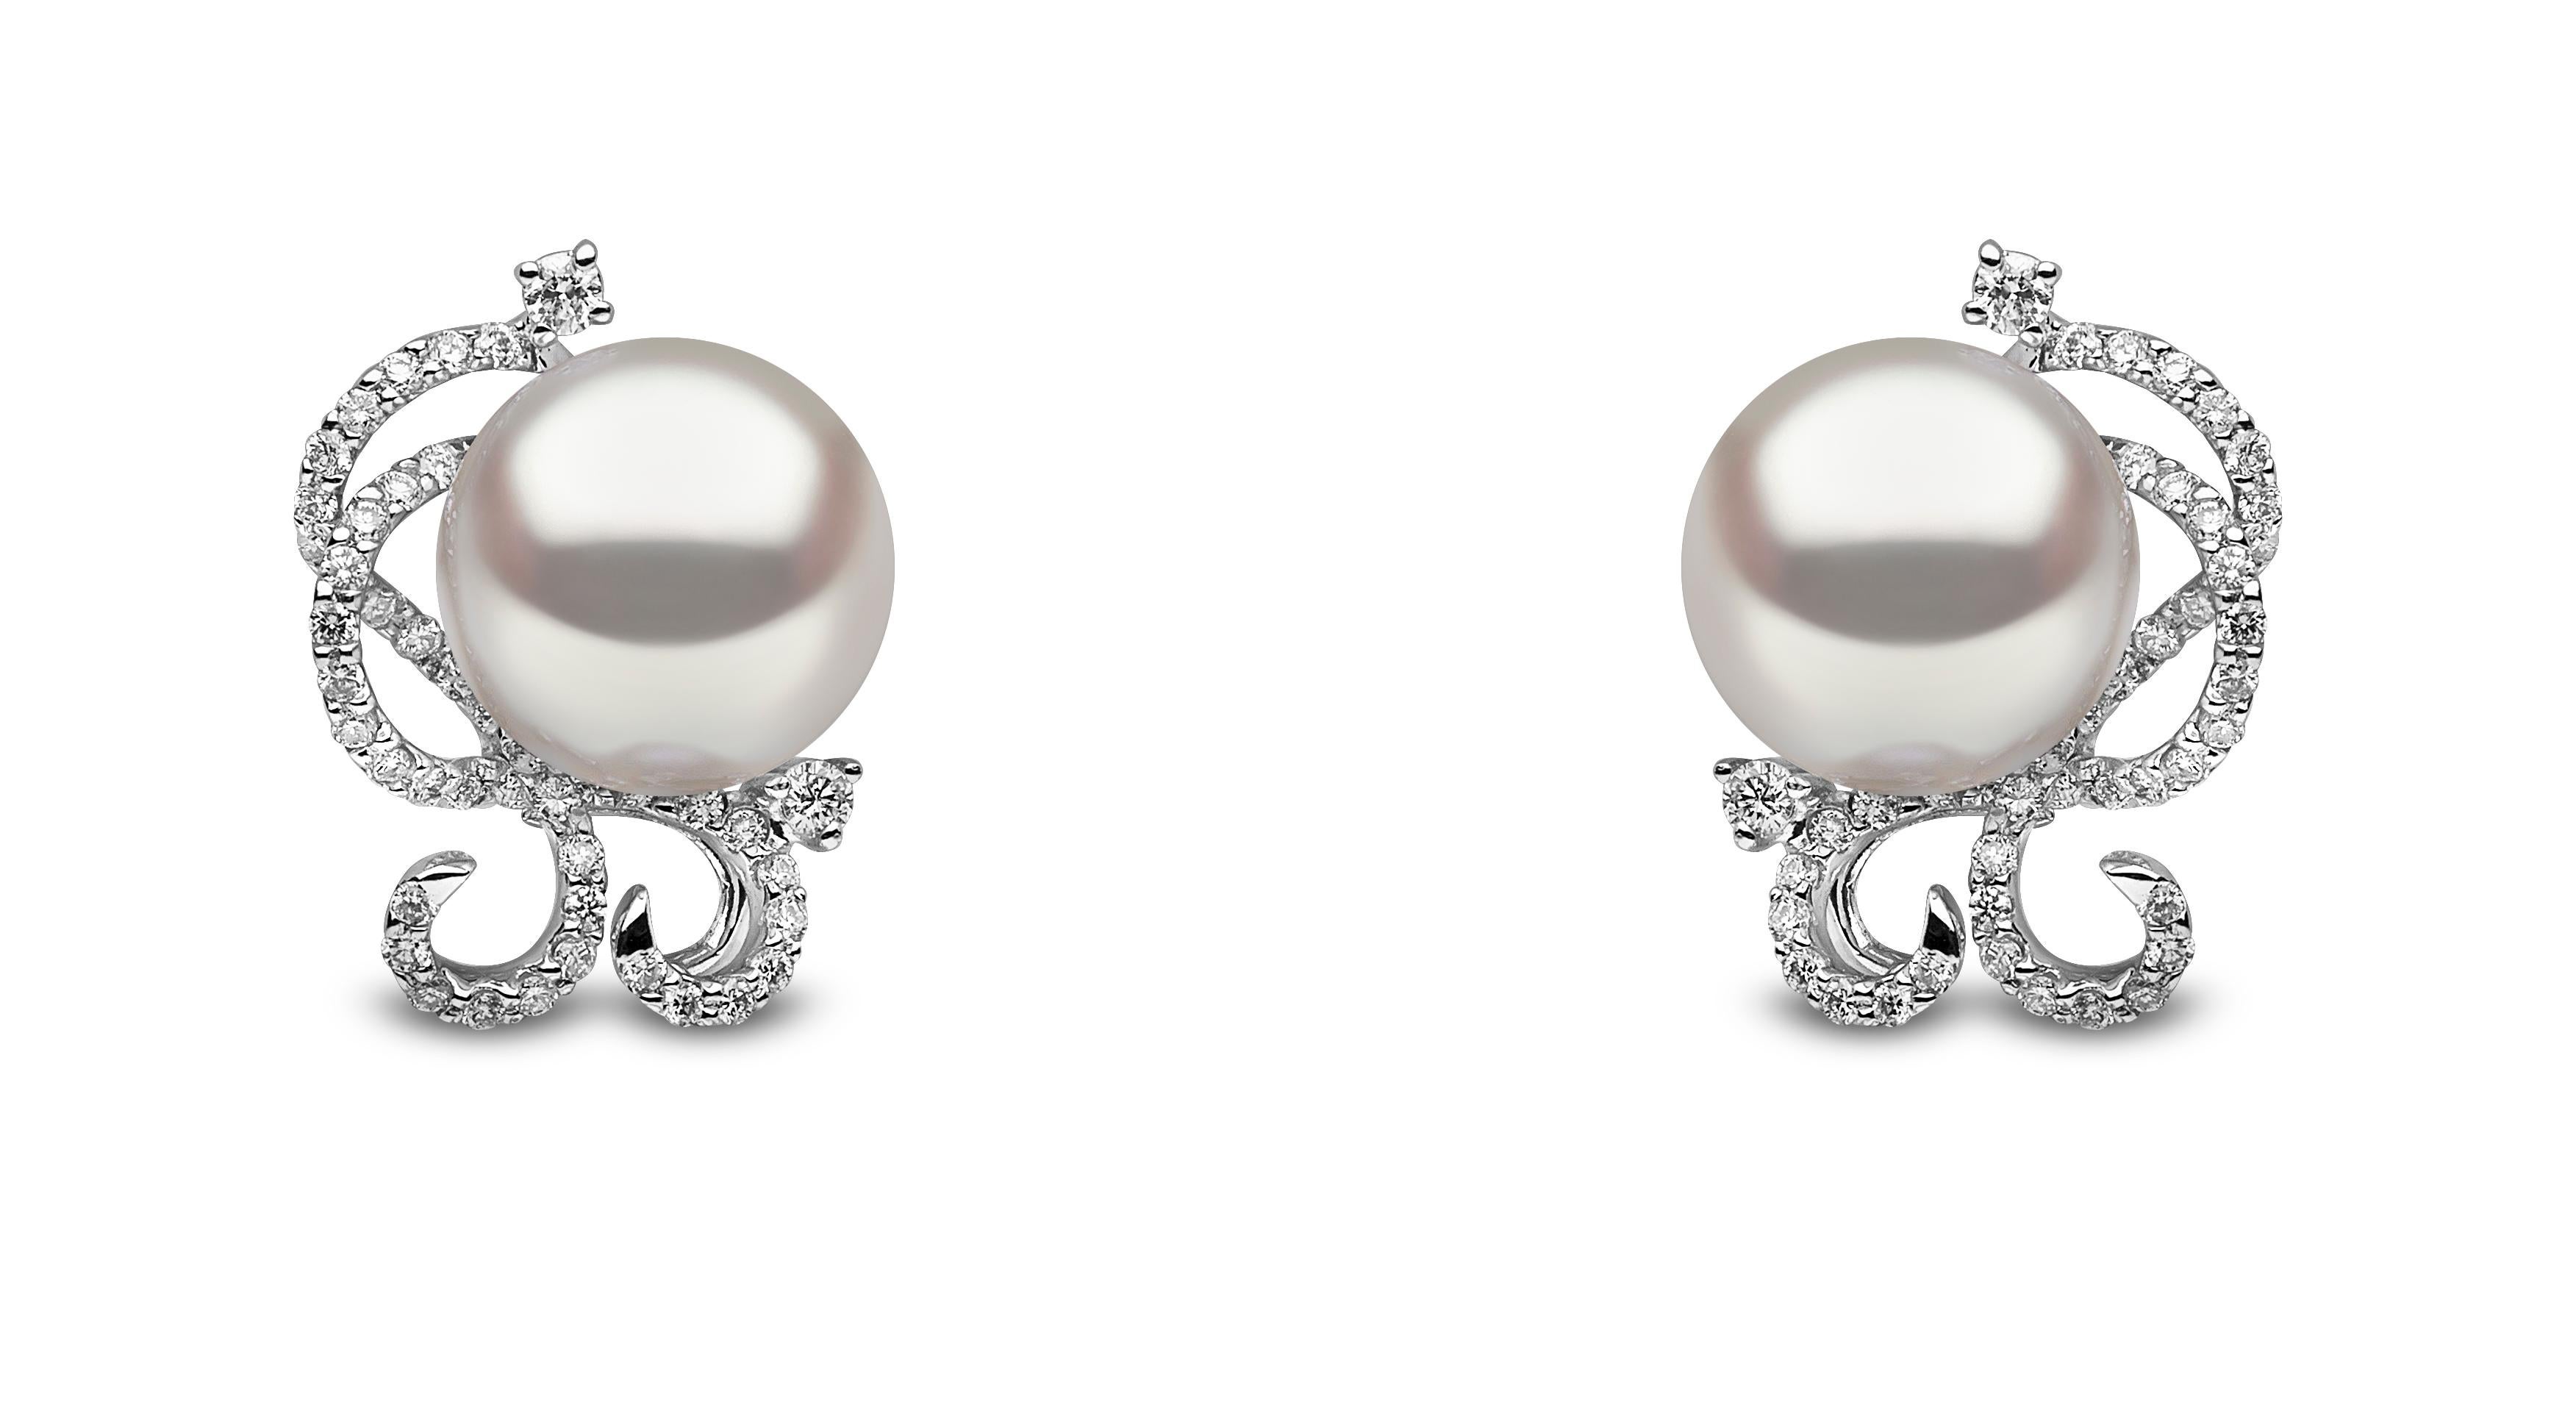 These elegant earrings by Yoko London feature two lustrous South Sea pearls, perfectly accented by an opulent arrangement of diamonds. These intricate earrings have been designed and hand finished to the highest by some of the world’s leading pearl